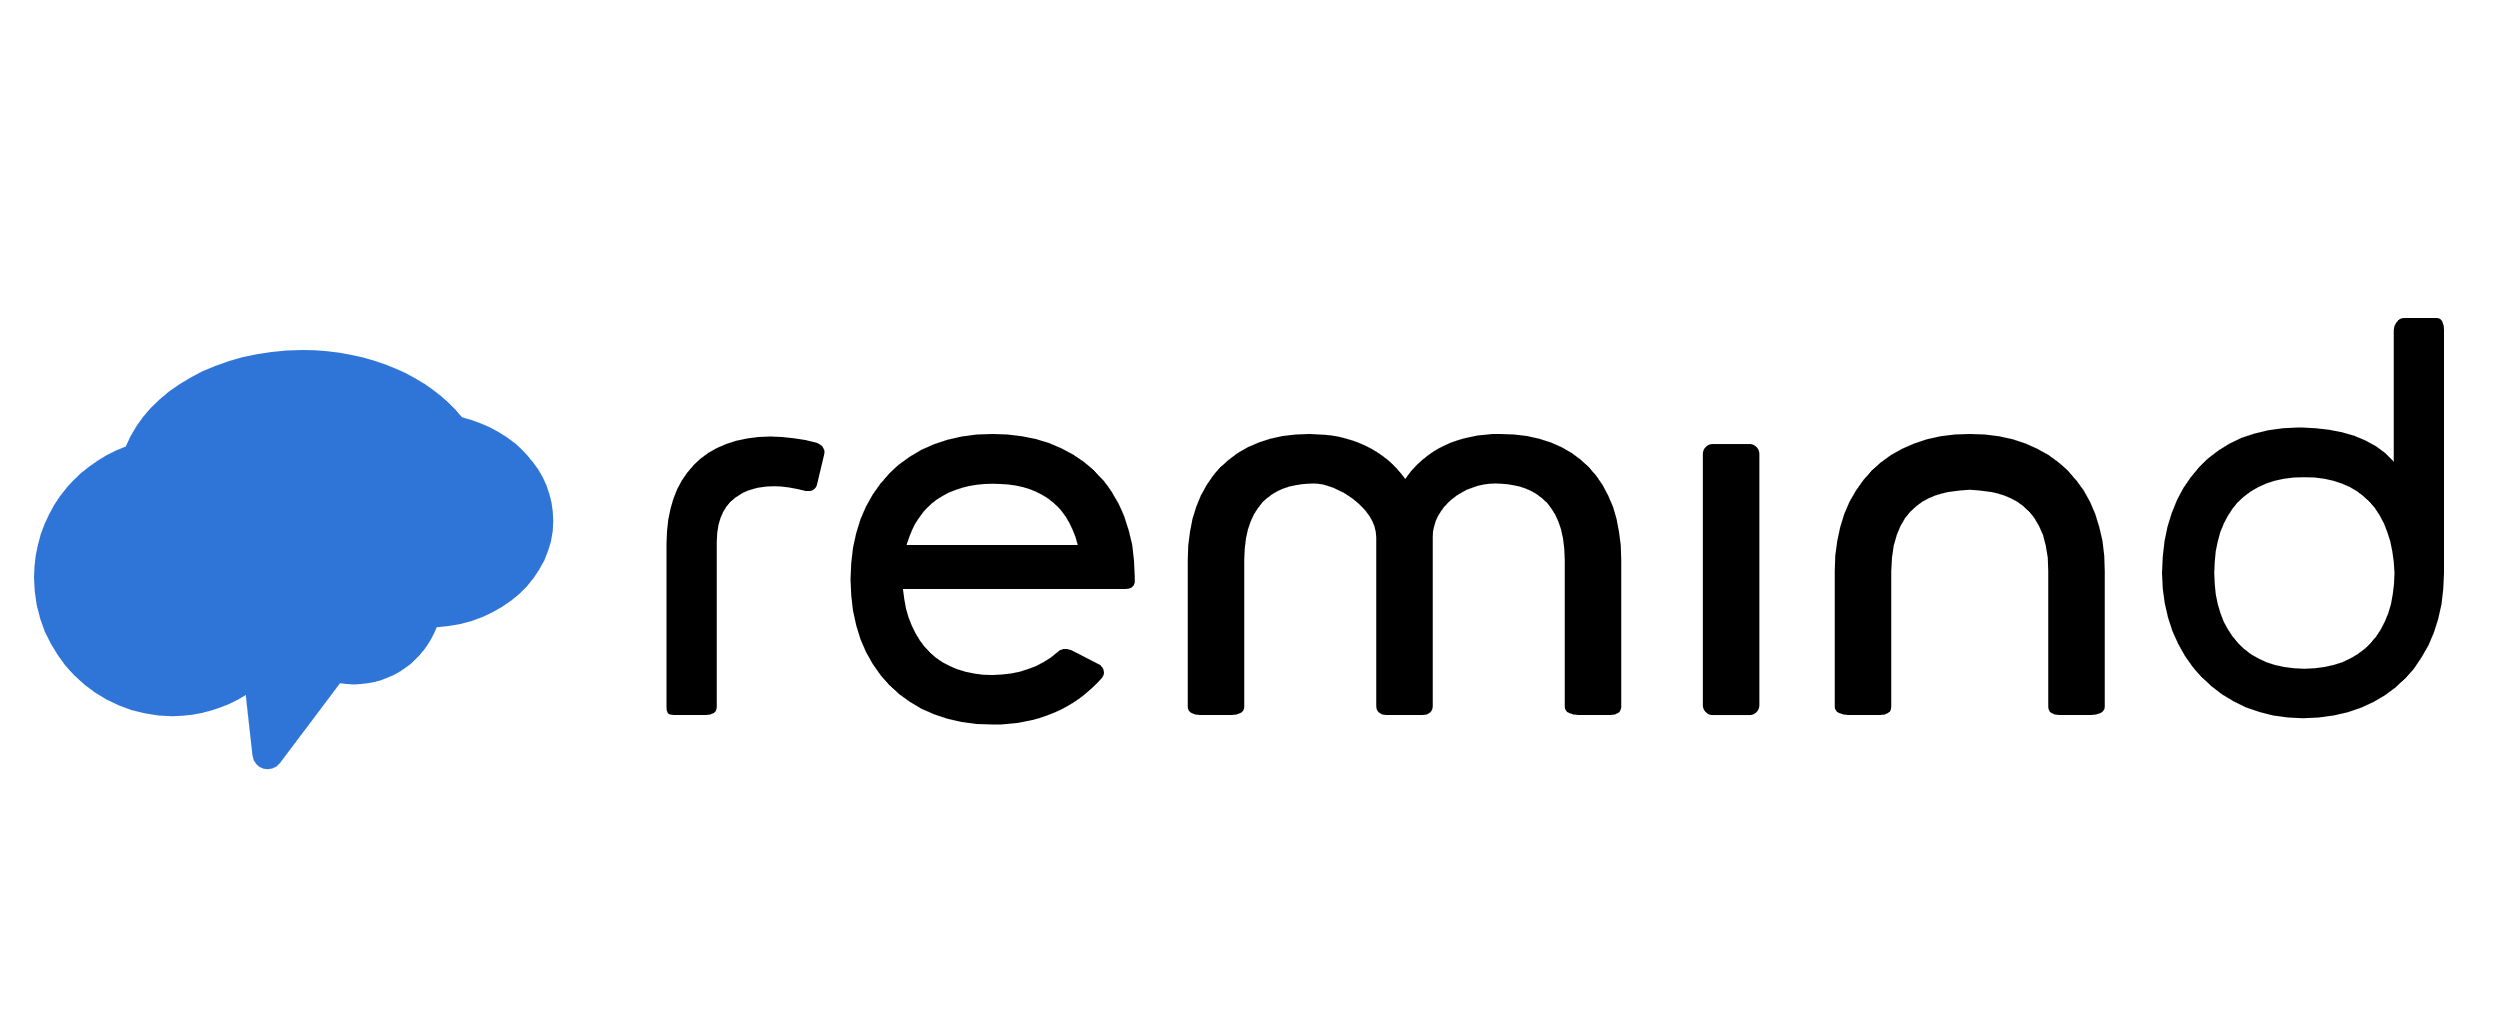 Remind Launches Preferred Language Translation to Help Educators Connect  With Students and Parents as More Schools Return to In-class Instruction |  Business Wire